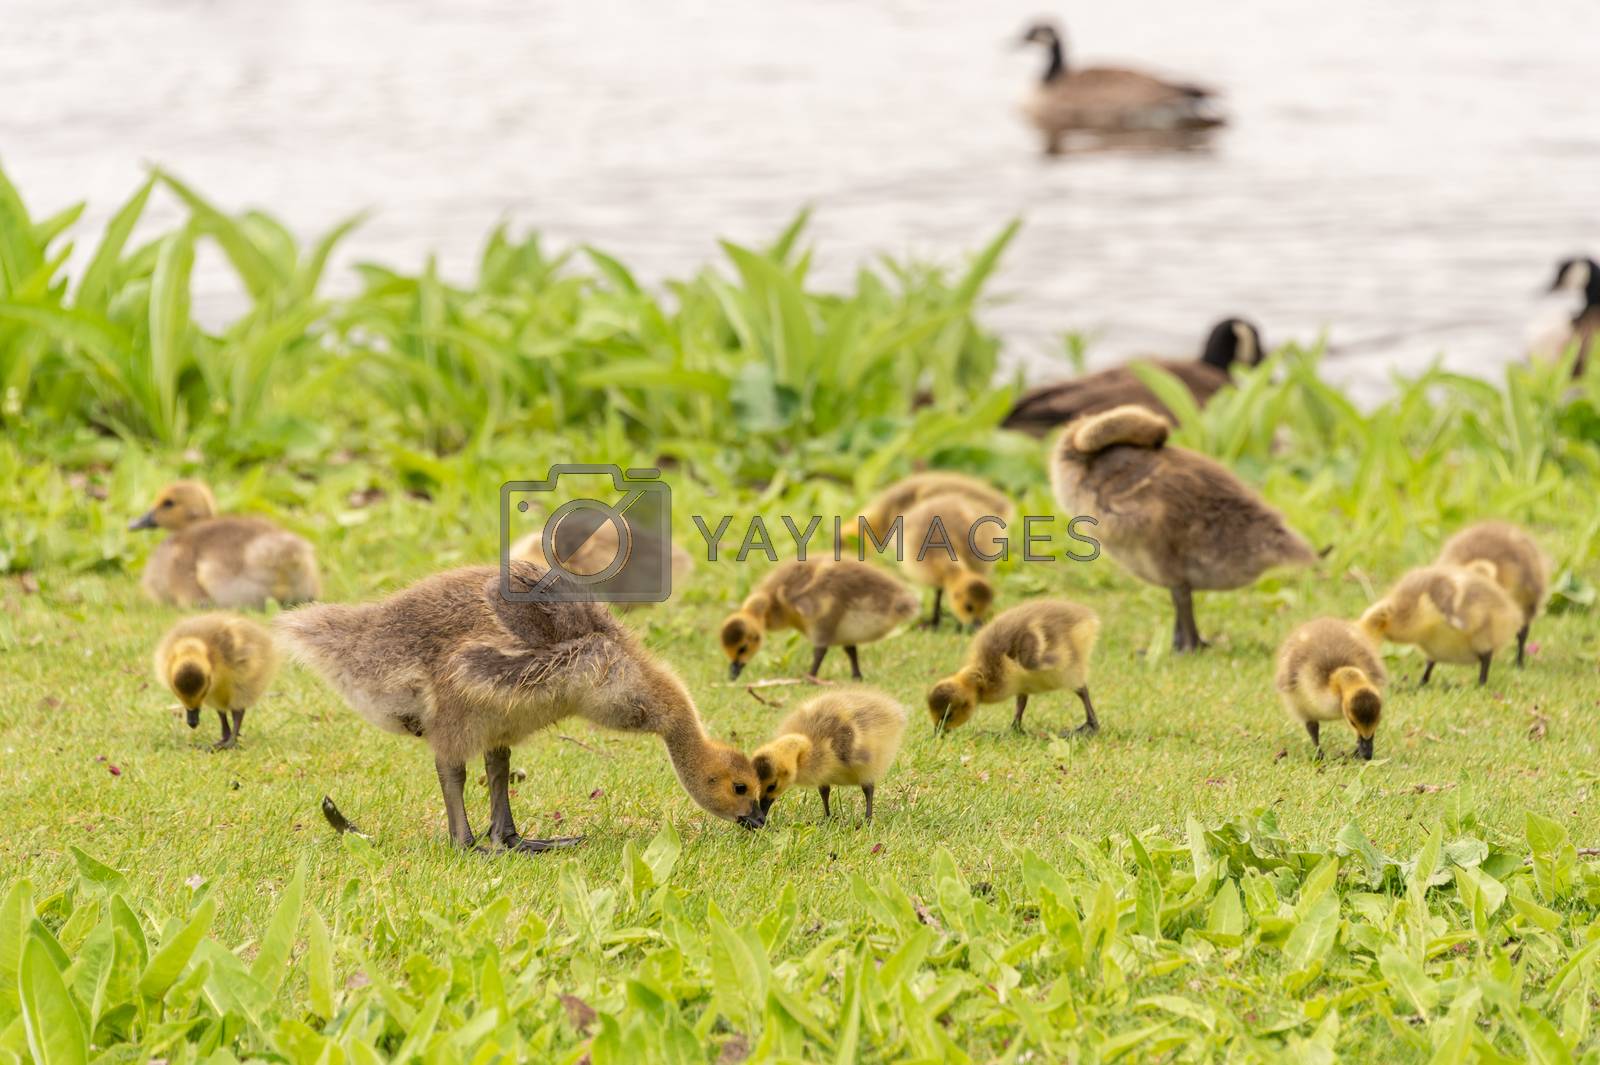 Royalty free image of Gaggle of Canadian goose goslings by mbruxelle